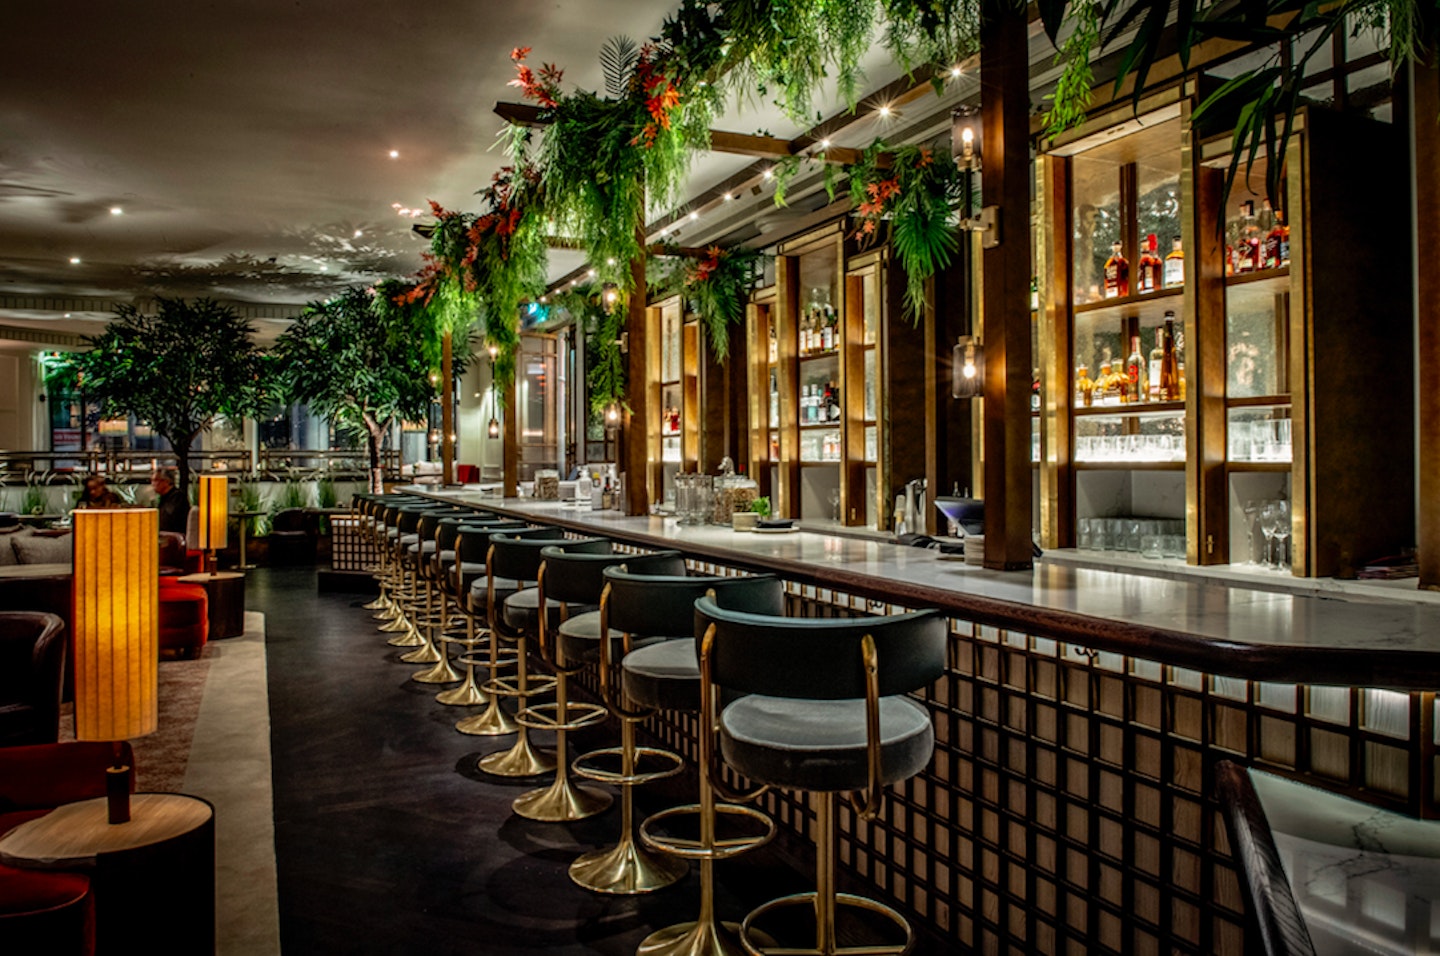 Things to do in Mayfair, London: Restaurants, hotels and bars